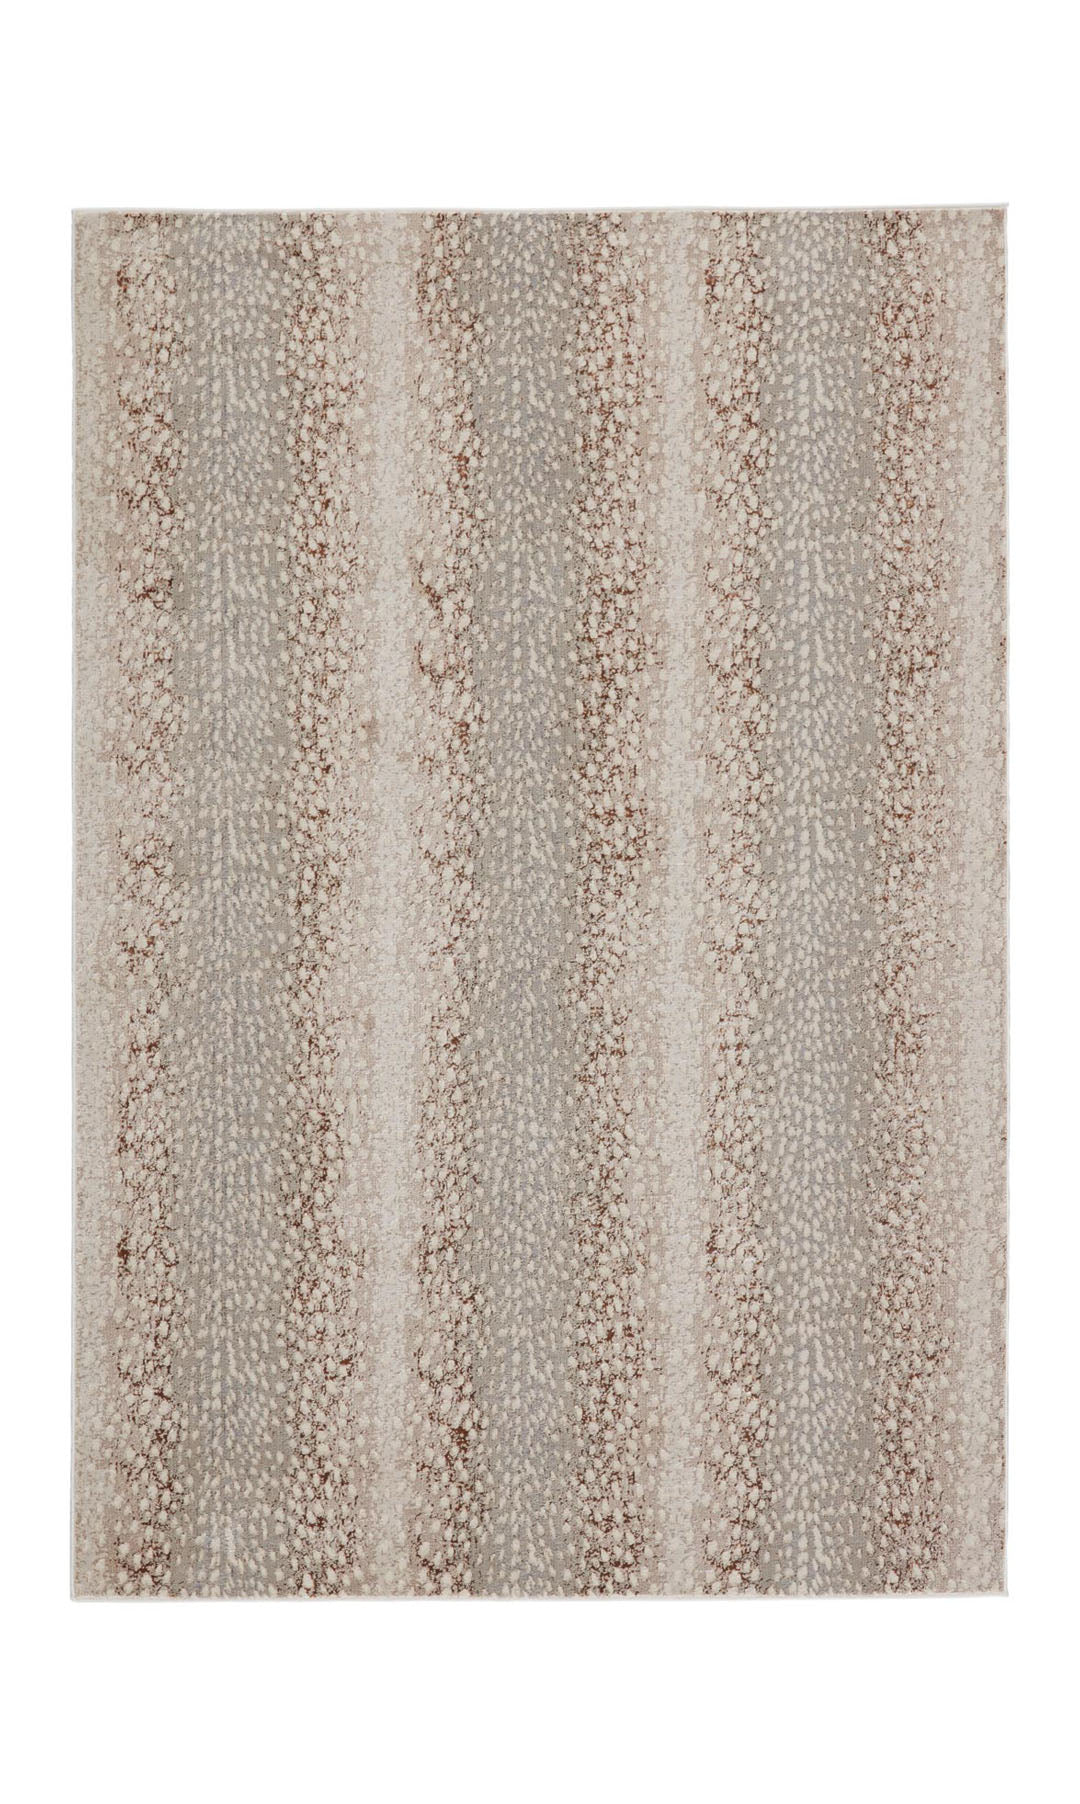 Catalyst Axis Rug | Jaipur Living | Rugs | catalyst-axis-rug-cty14